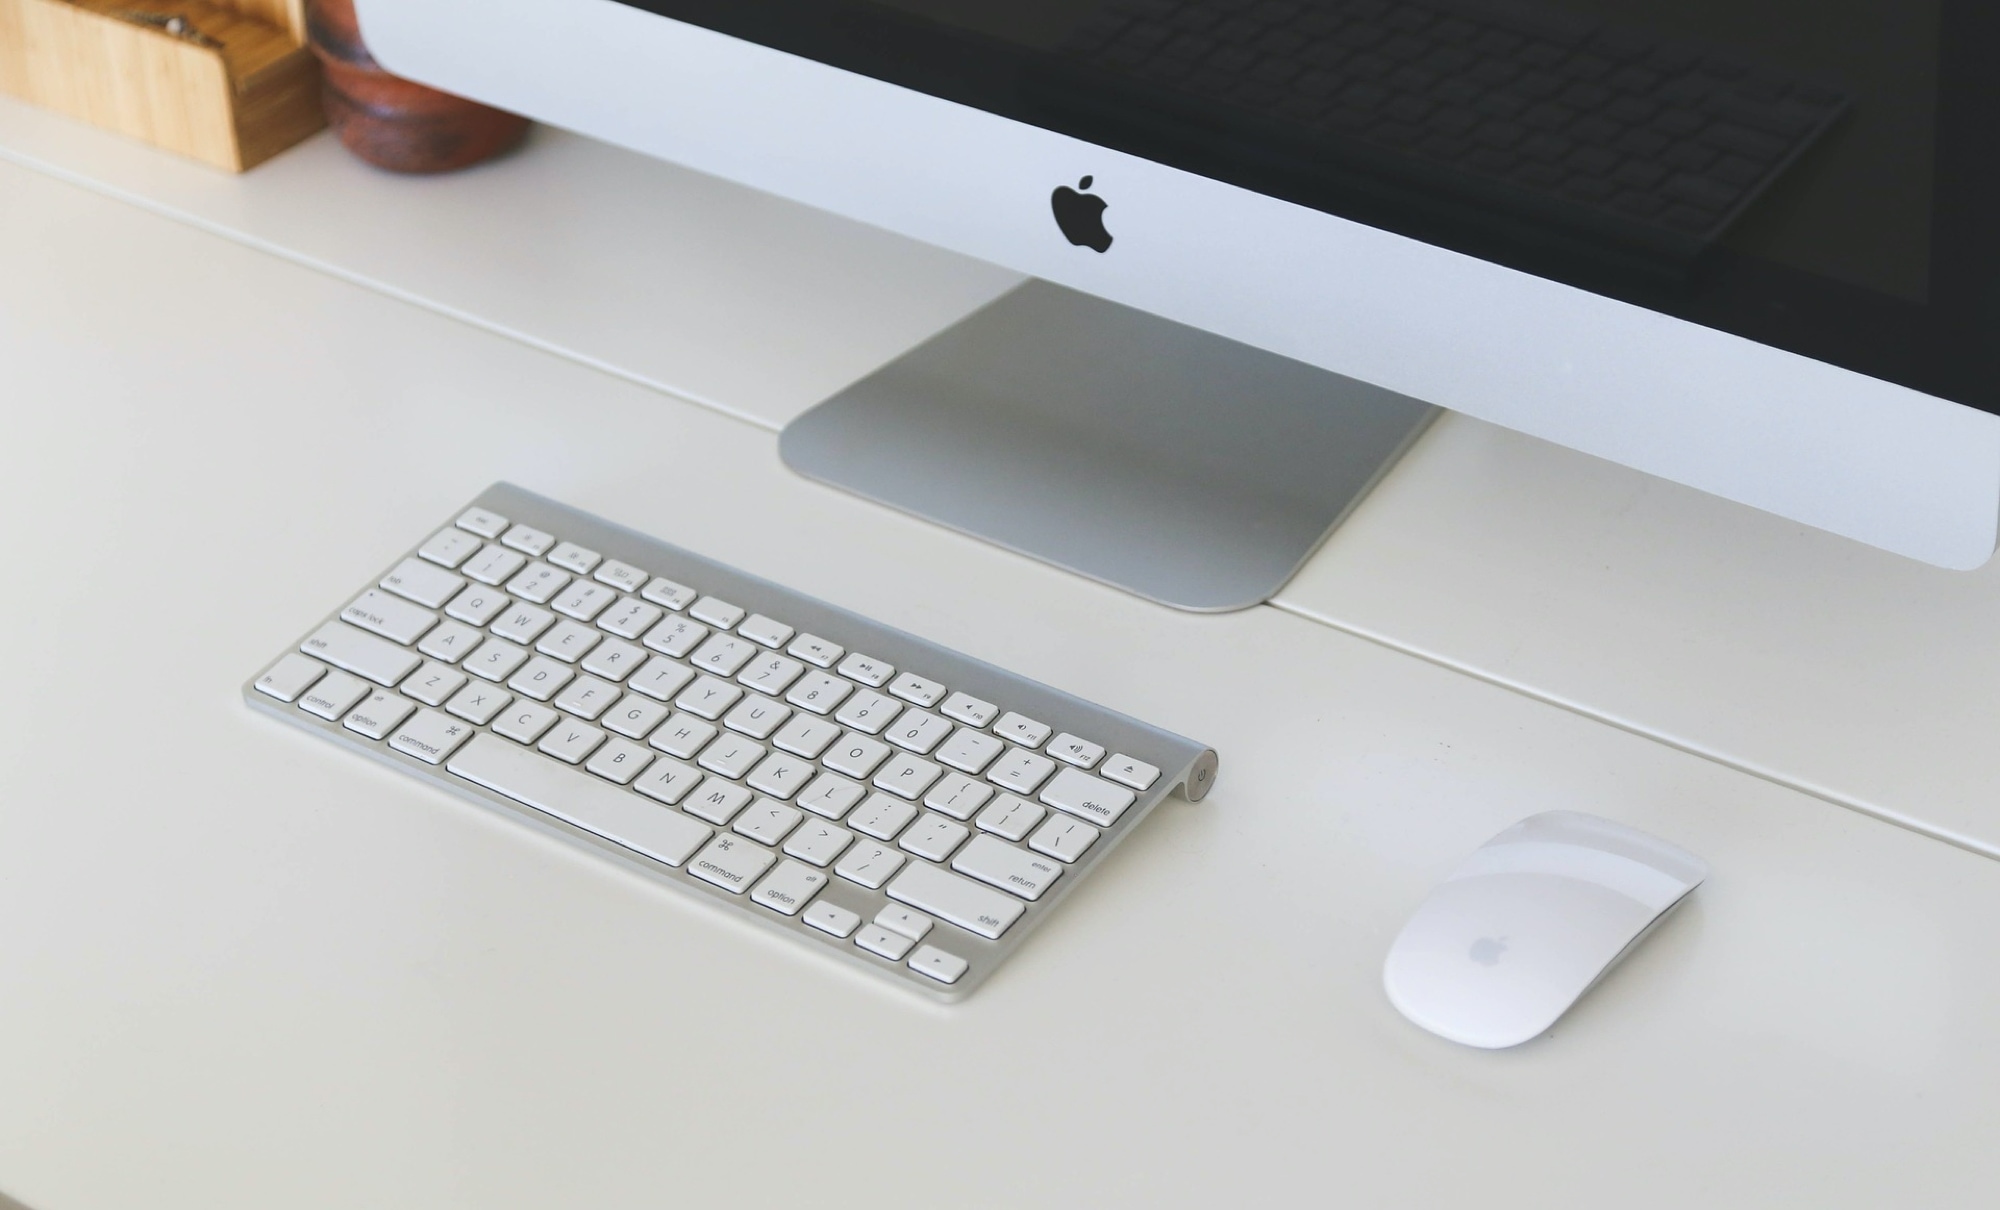 Teset Bluetooth mac - a close-up showing the lower half of an iMac with Apple's wireless keyboard and mouse